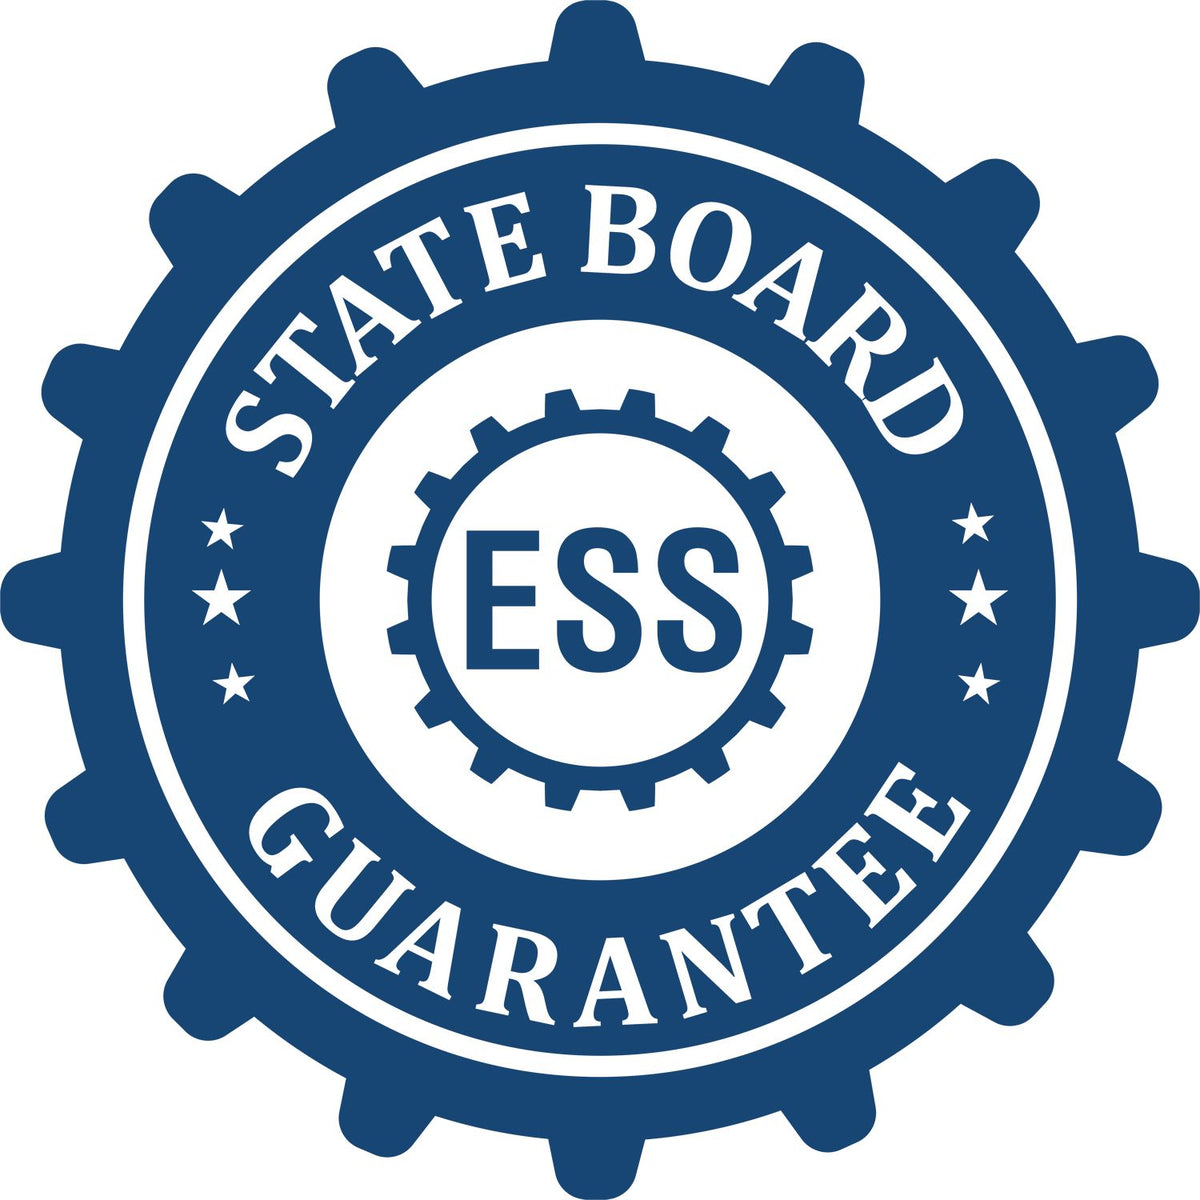 An emblem in a gear shape illustrating a state board guarantee for the State of Arizona Extended Long Reach Engineer Seal product.